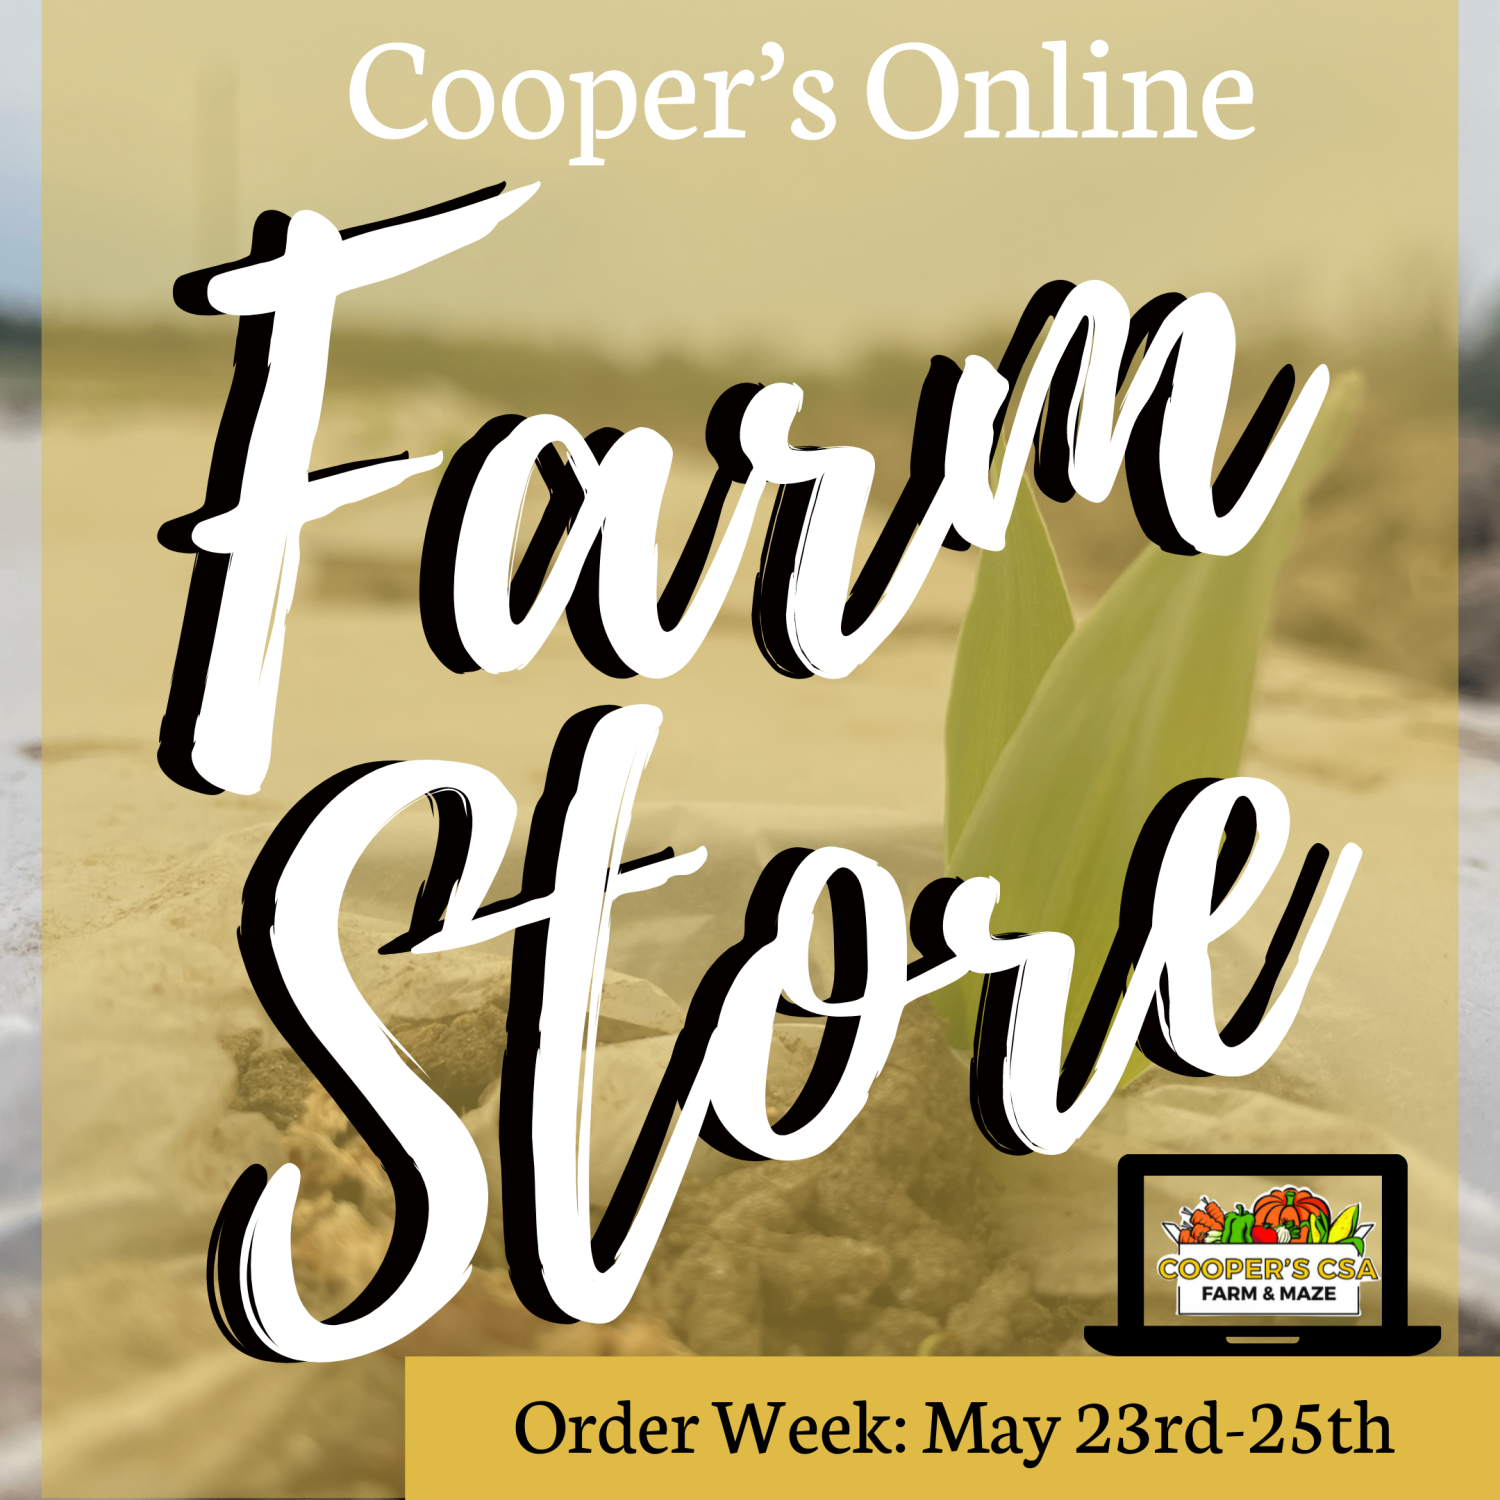 Coopers CSA Online FarmStore- Order Week May 23rd-25th